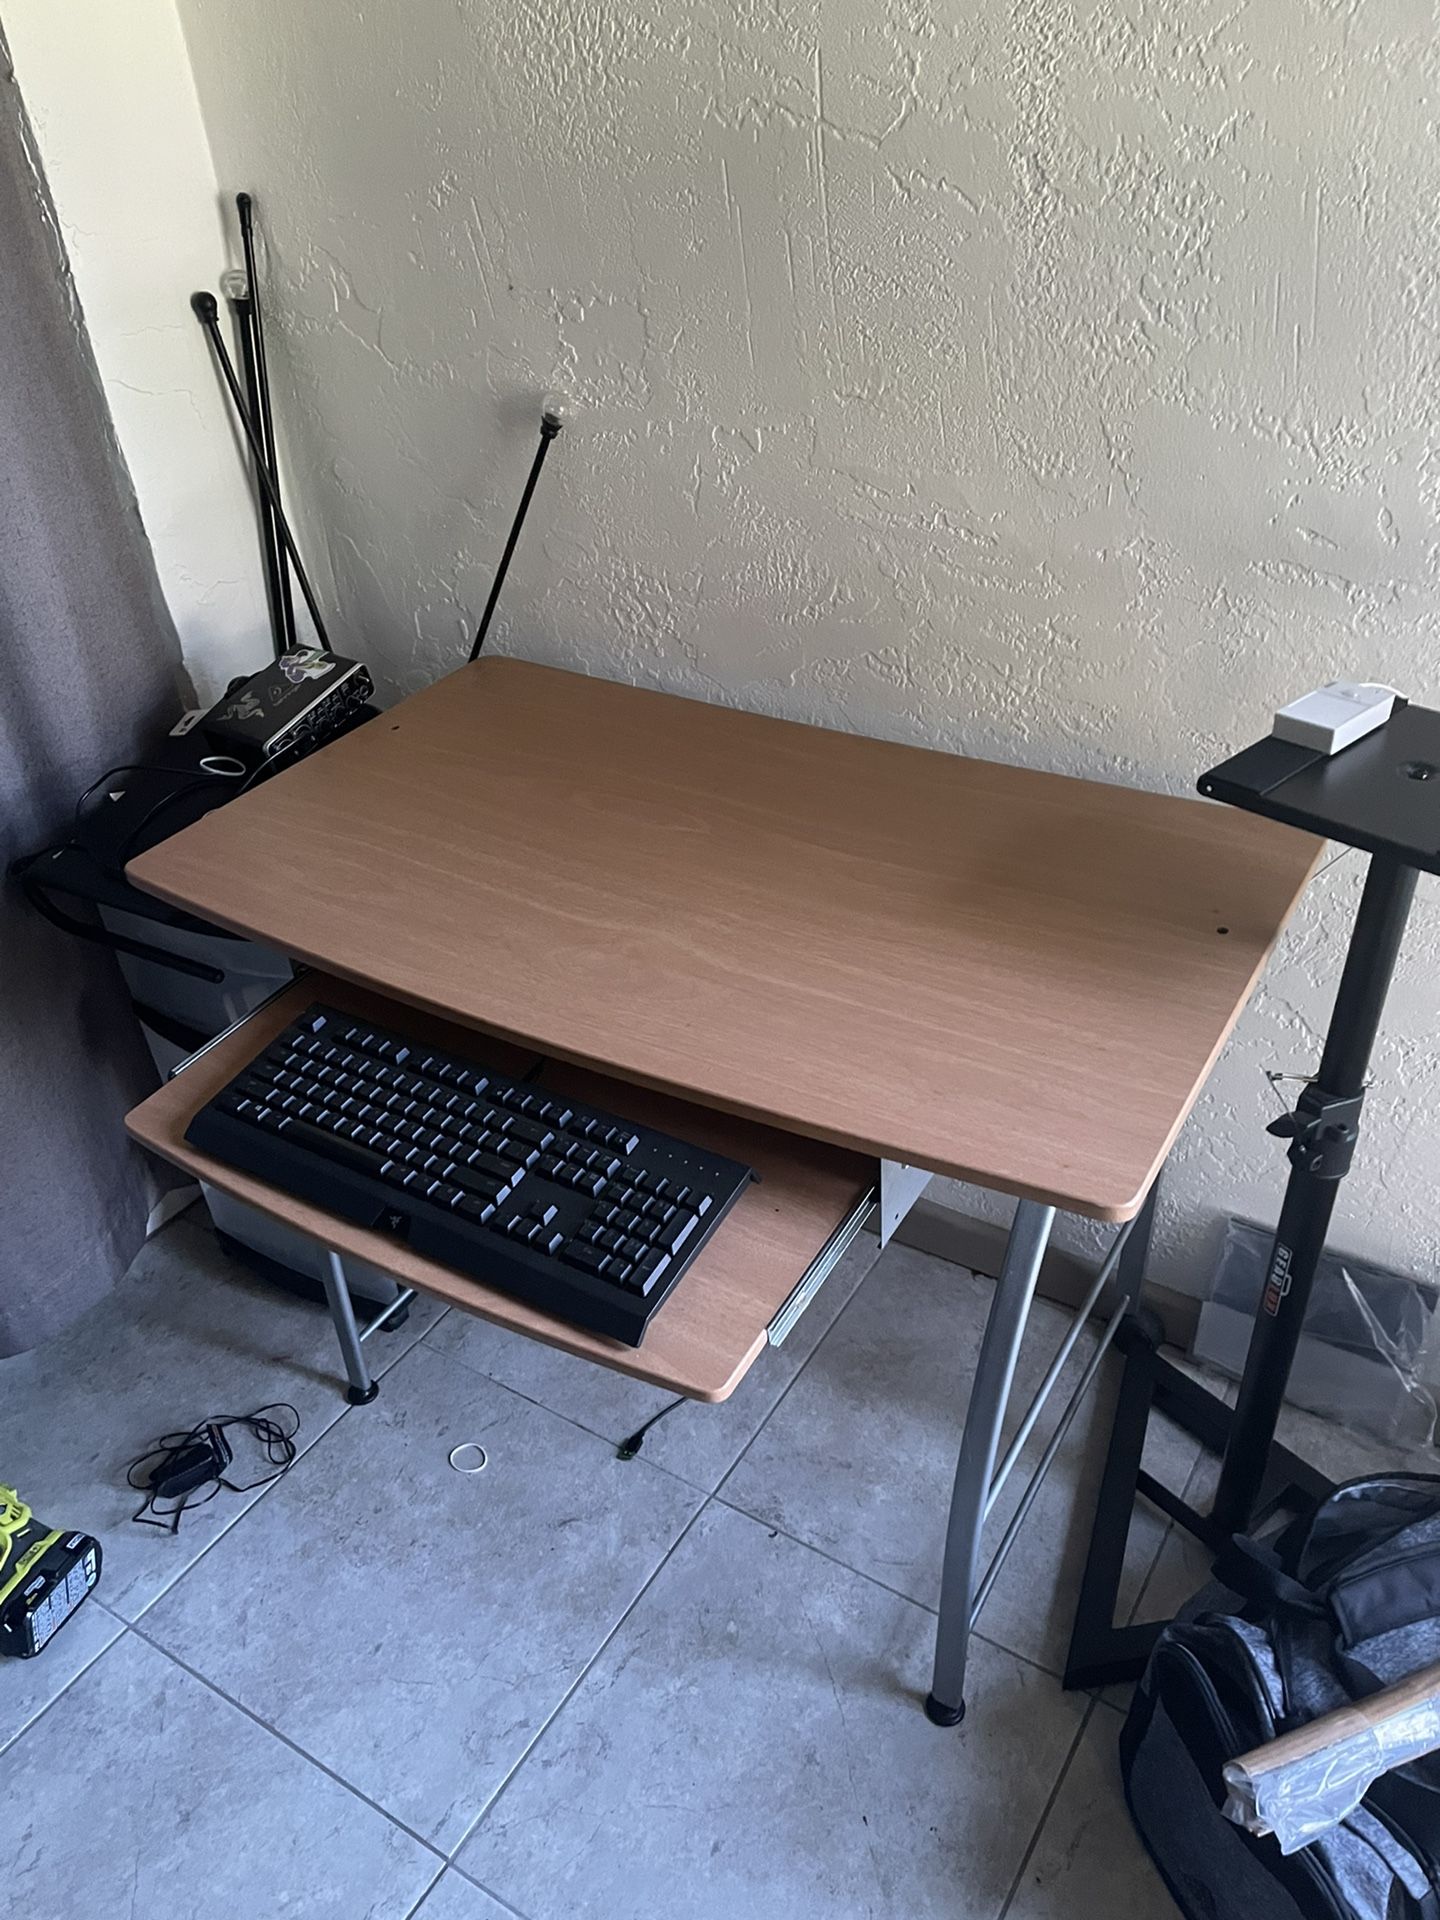 Small Computer Desk Perfect For Bedroom No Scratch’s Or Marks 